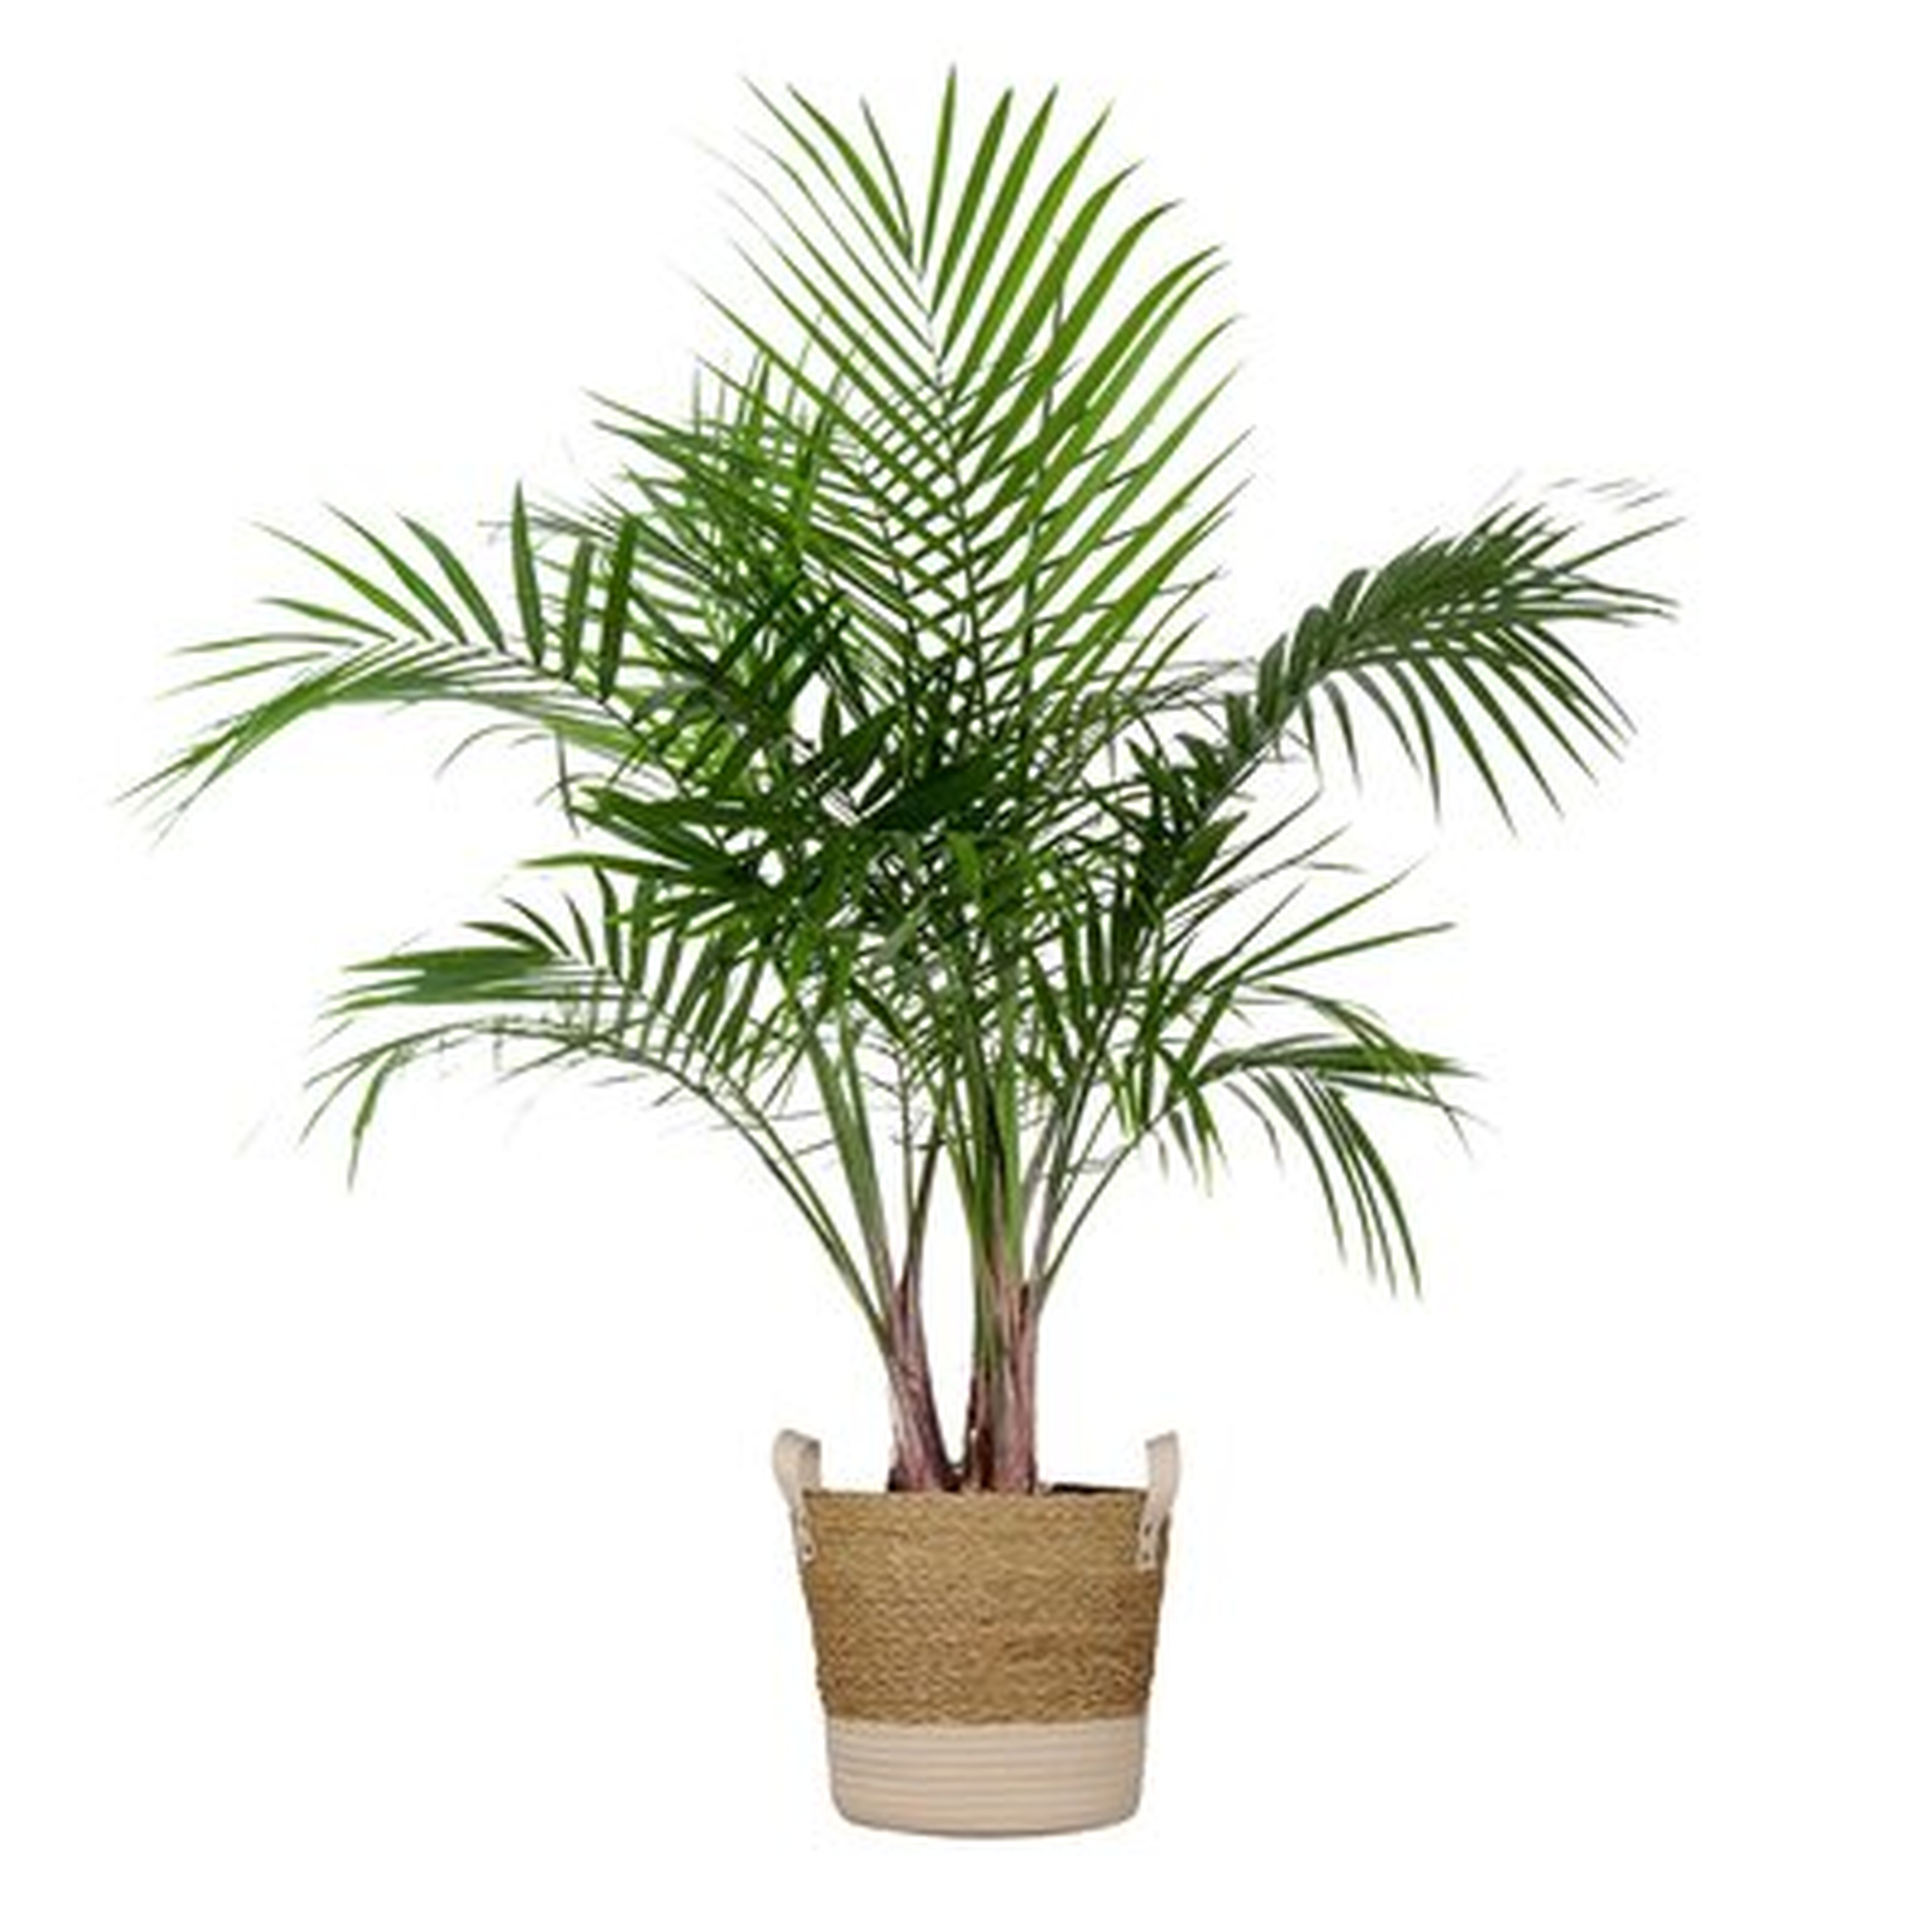 Majesty Palm Live Indoor Houseplant  In 10 Inch Beige And White Whicker Basket - Wayfair